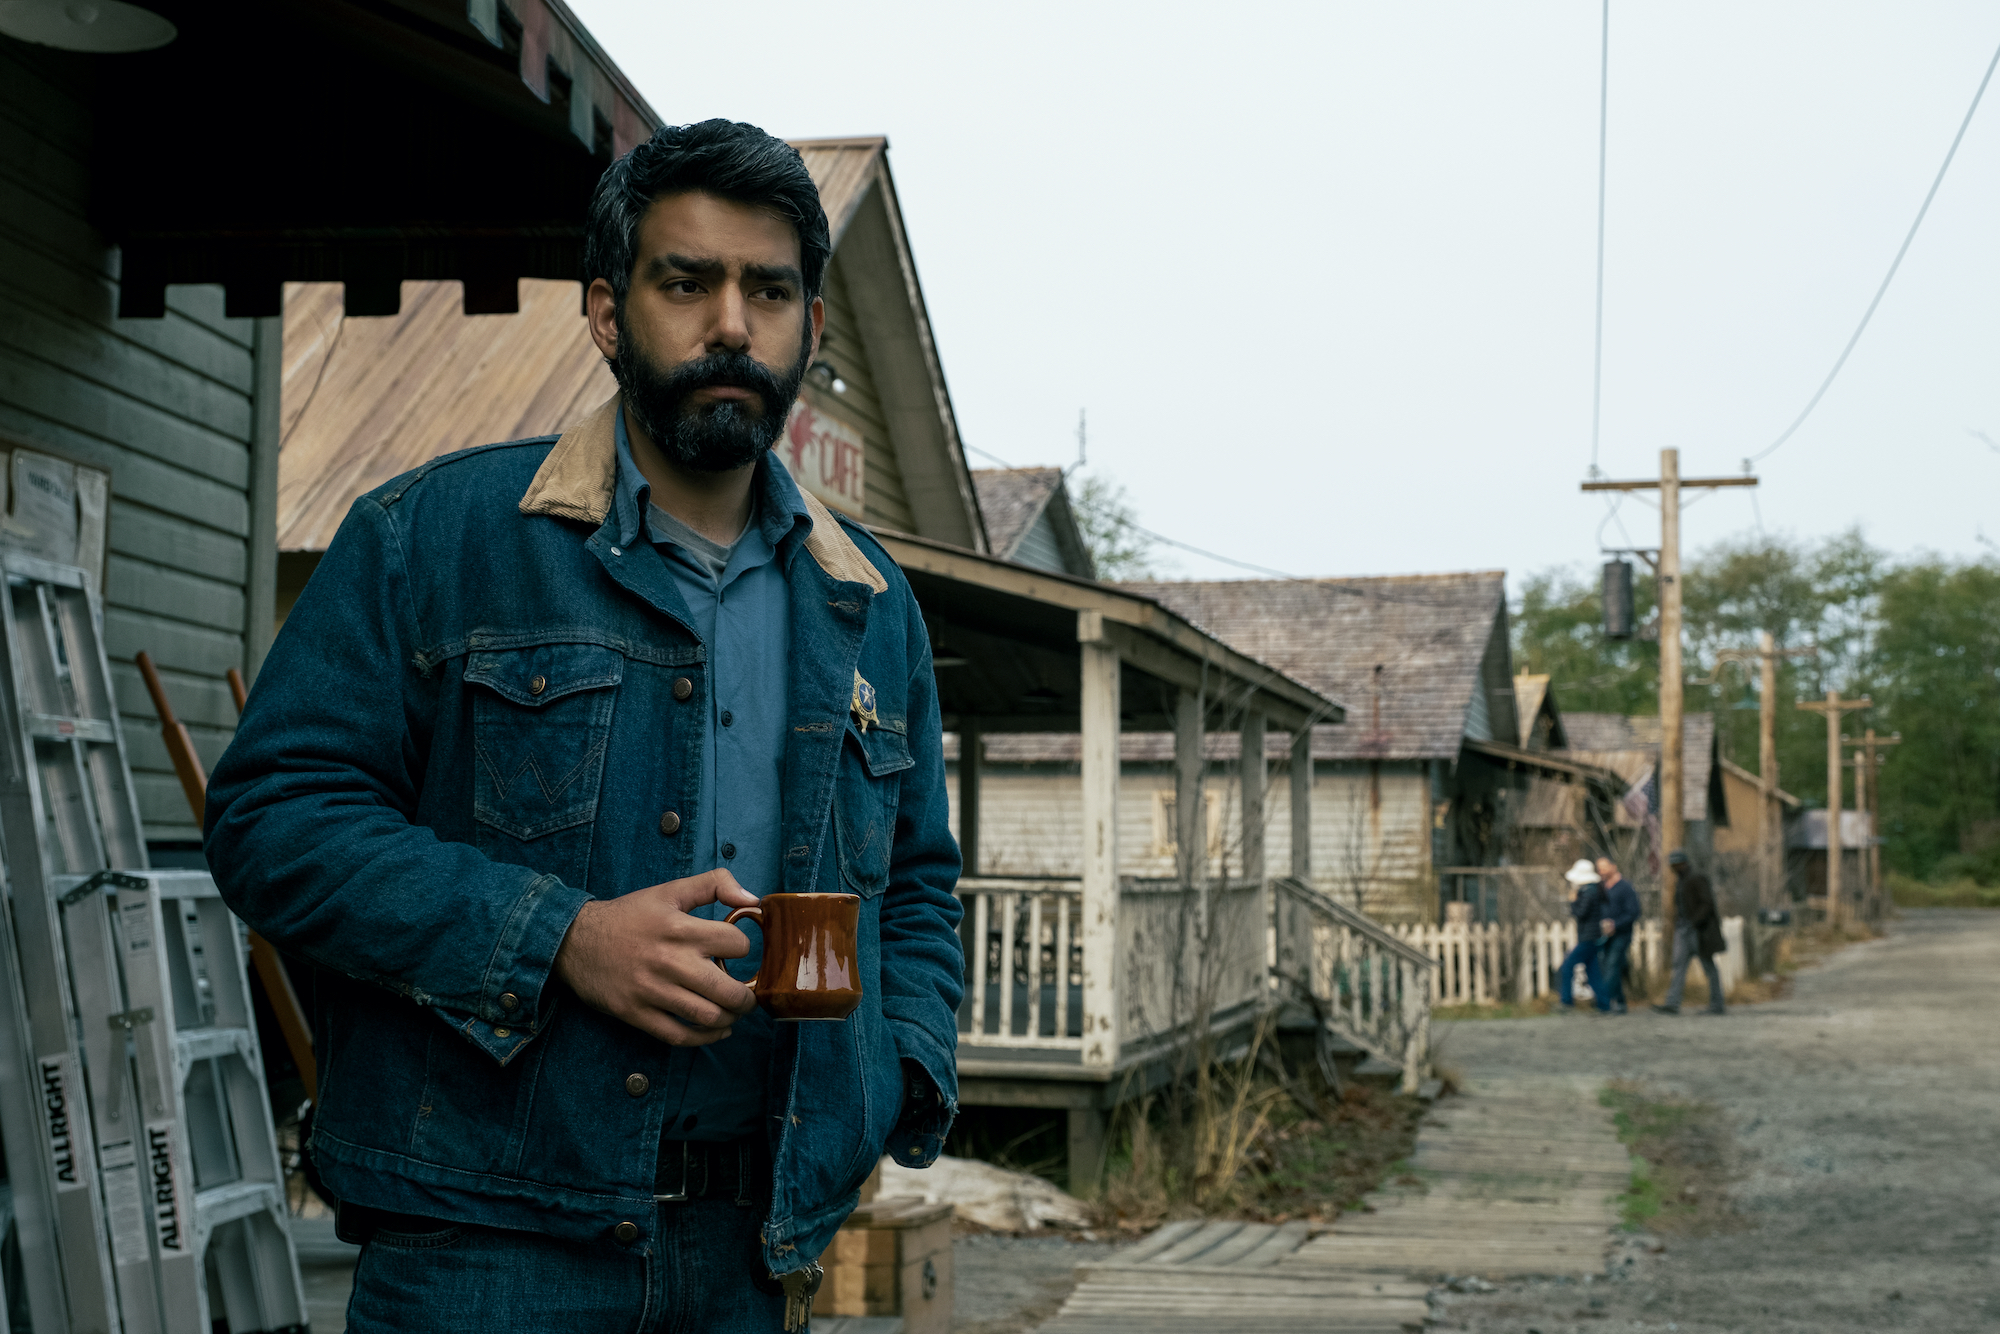 Rahul Kohli as Sheriff Hassan looking out over the town of Crockett Island in 'Midnight Mass'